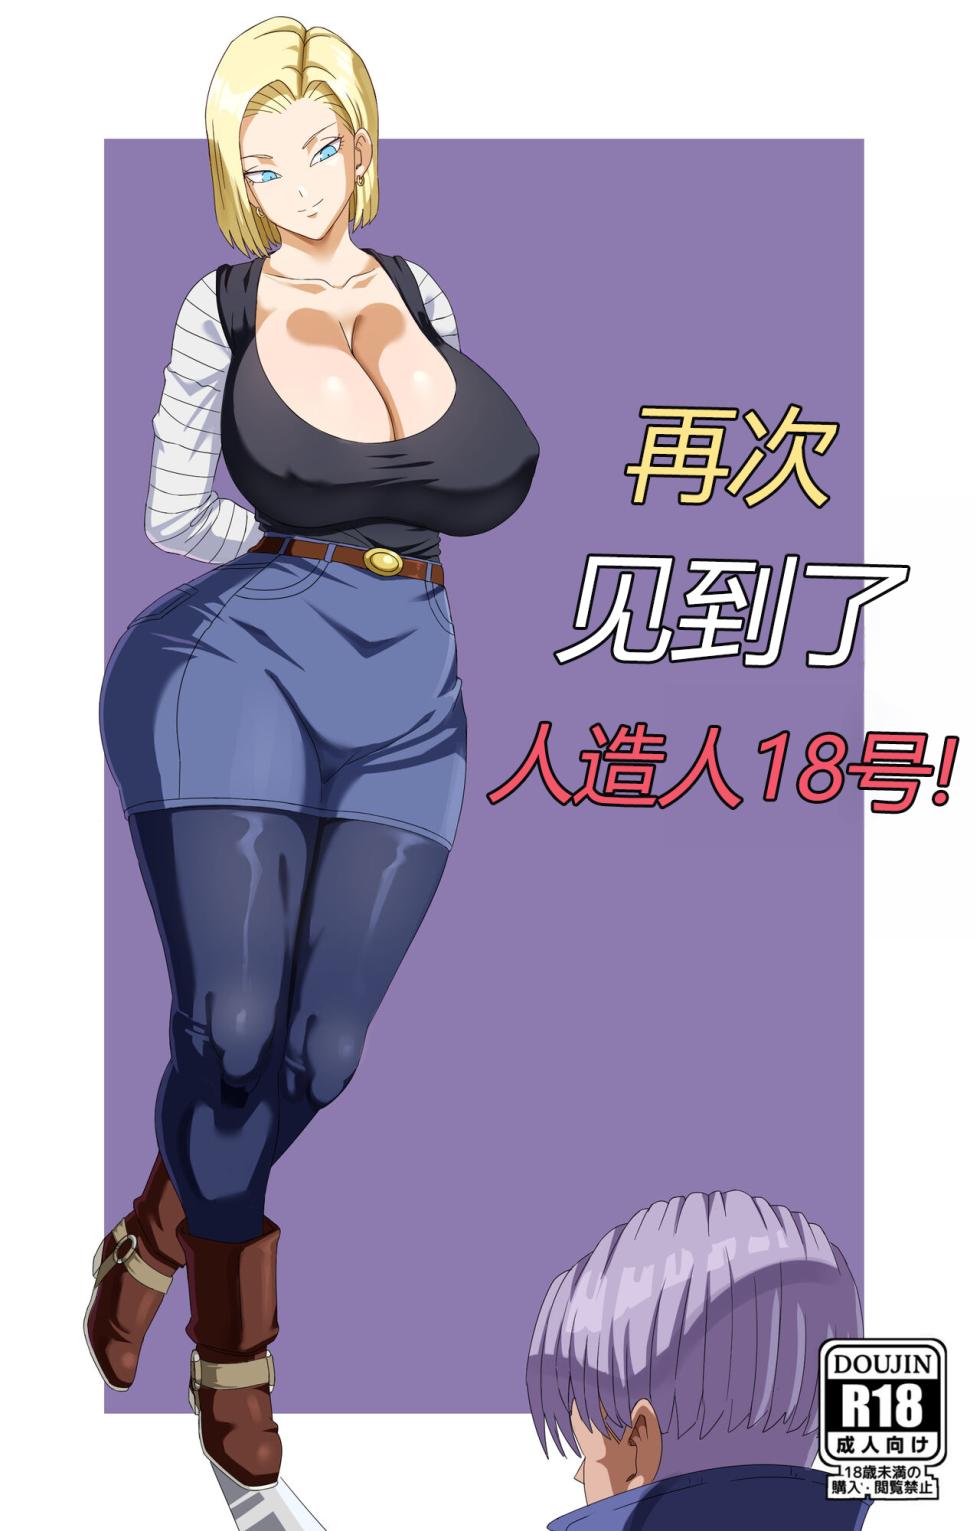 [Pink Pawg] Meeting Android 18 Yet Again (Dragon Ball Super)【秋刀鱼汉化组】 - Page 1